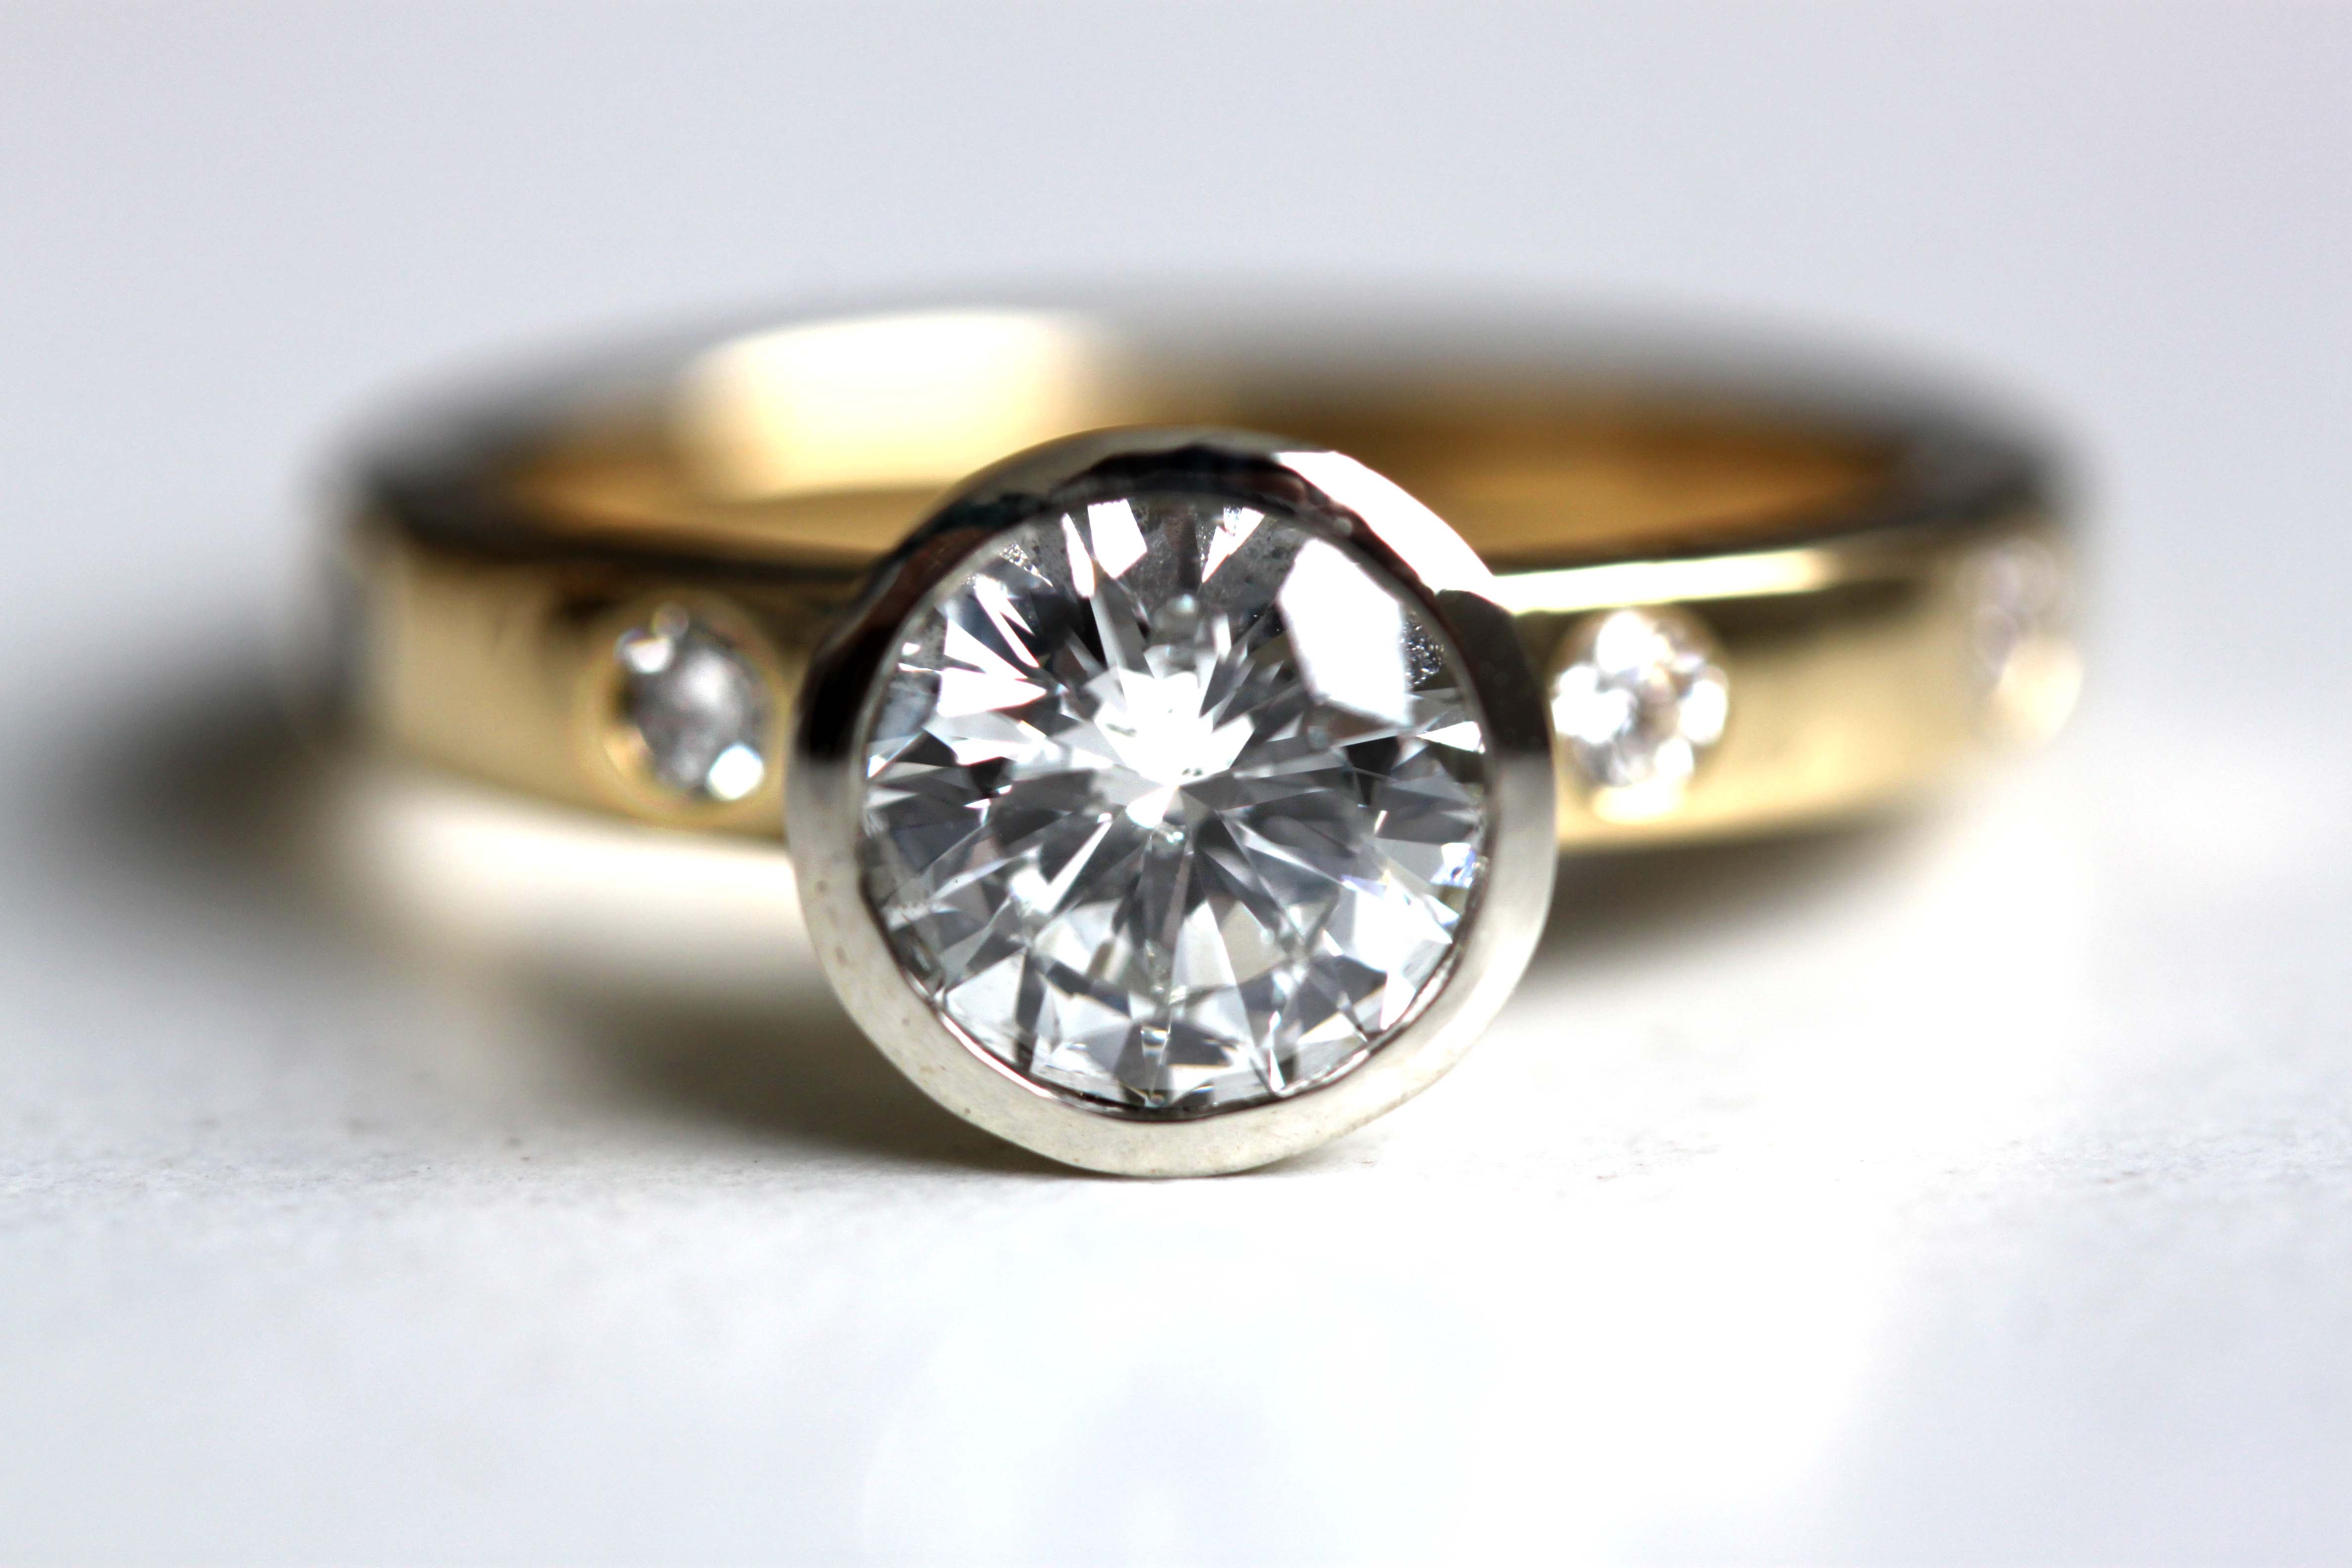 Mixed Metals & Round Cut Diamond Engagement Ring